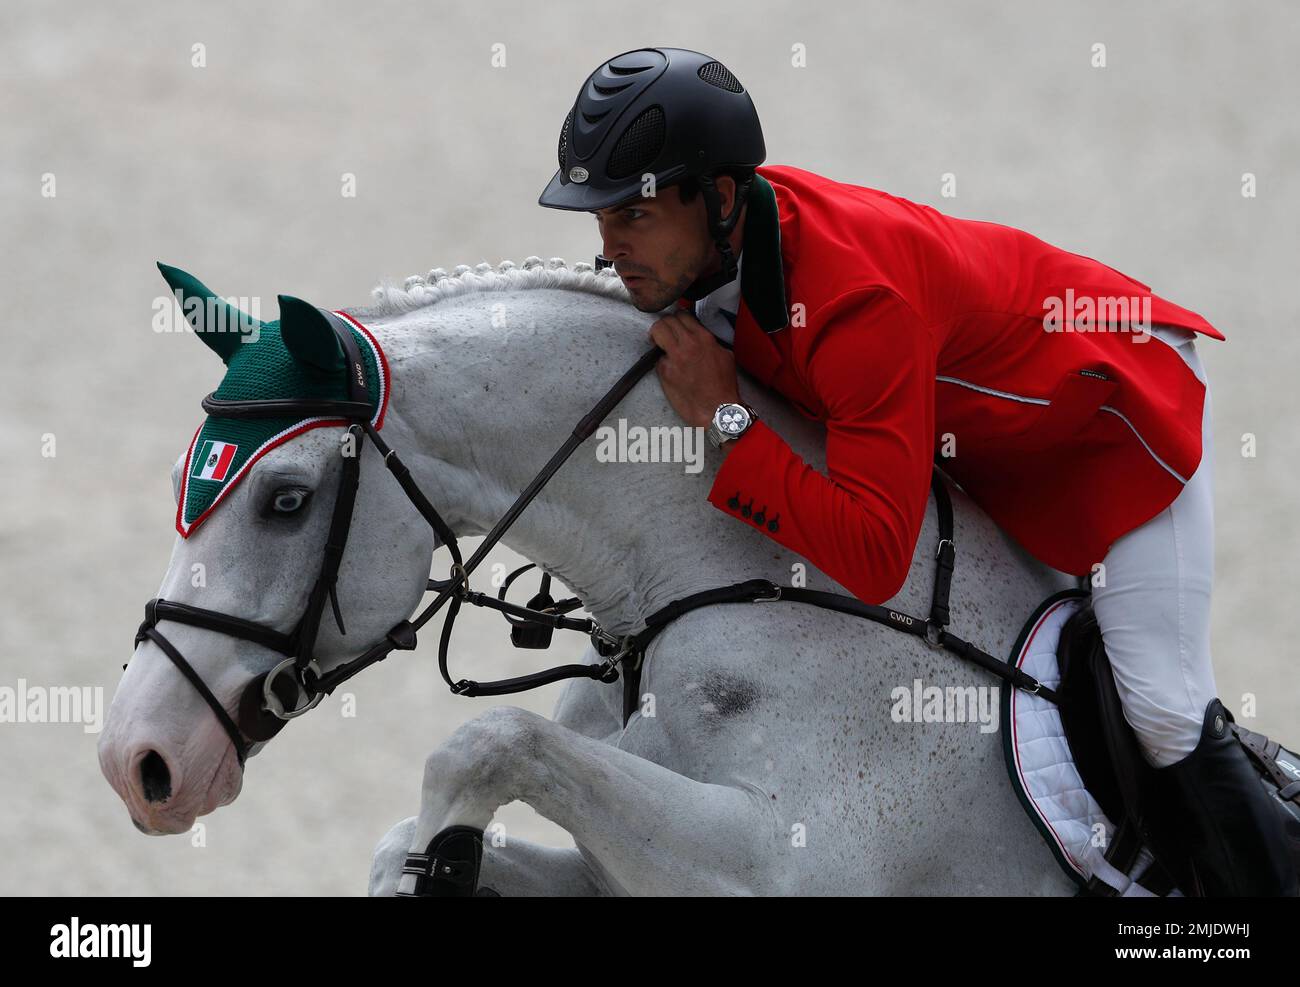 Mexicos Eugenio Garza Perez takes a jump on his horse Armani SI Z as he competes in the first classification round of individual and team equestrian jumping at the Pan American Games